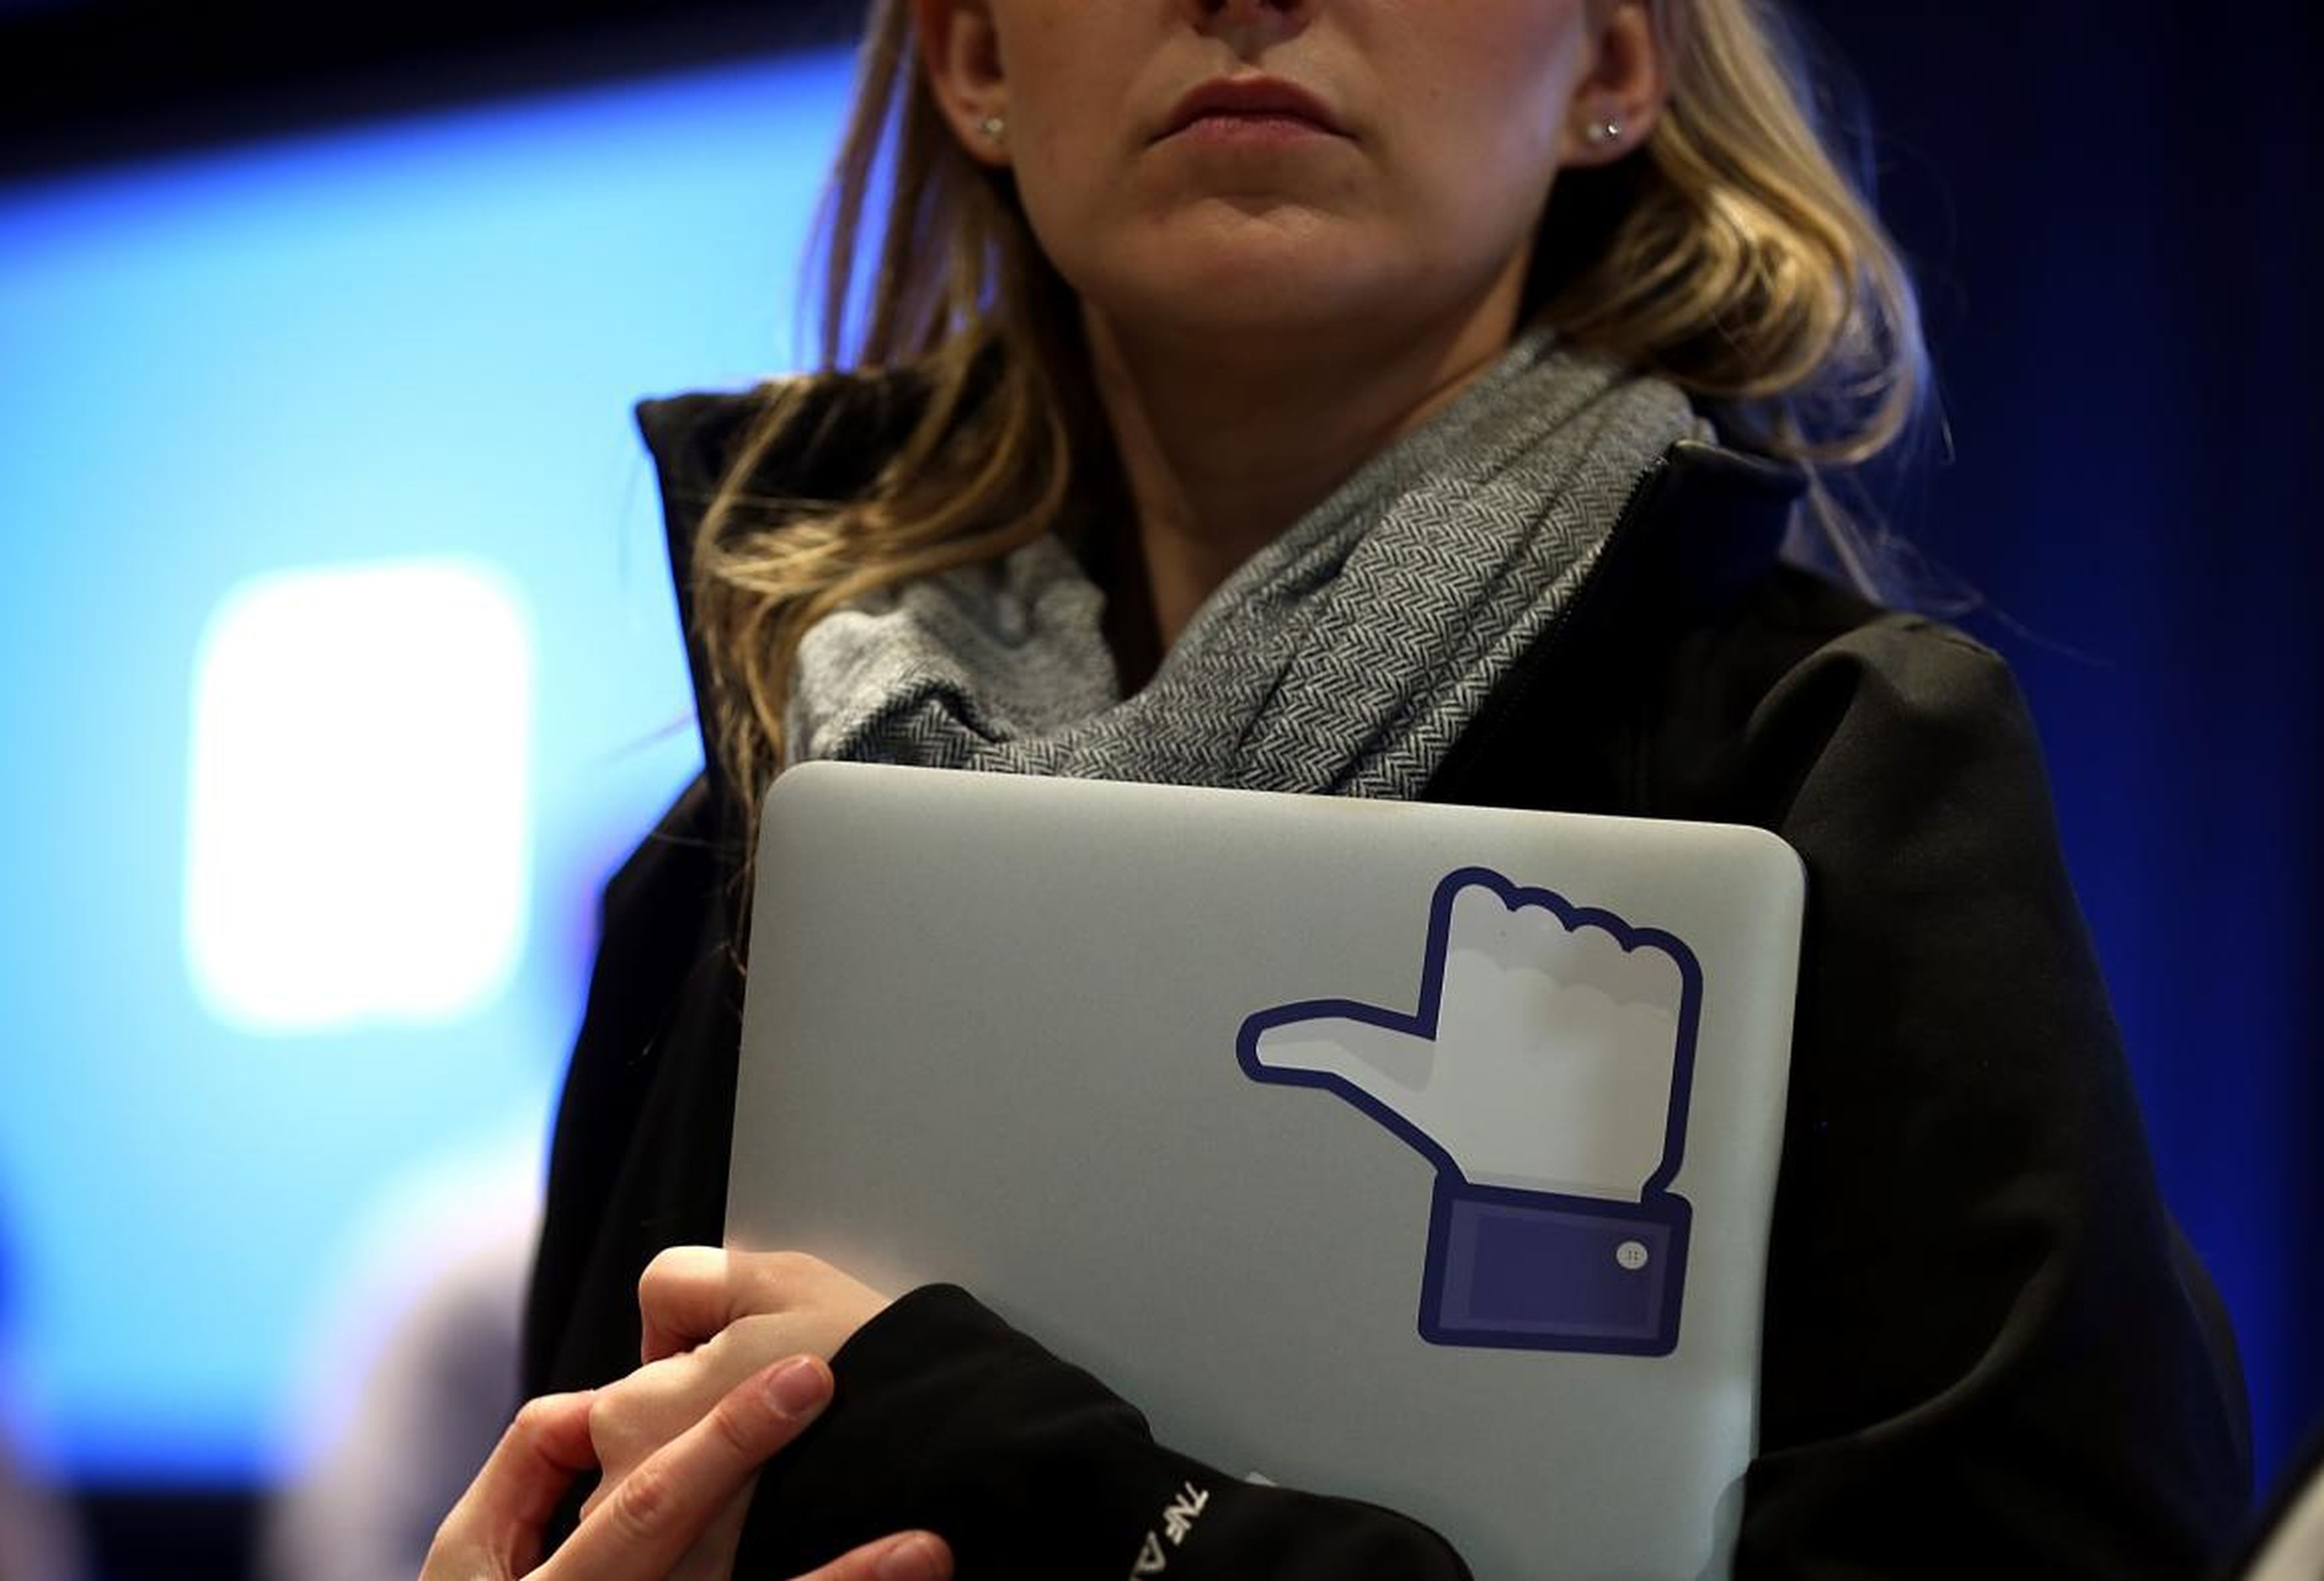 7. Hack into Facebook with permission, for rewards of up to $40,000